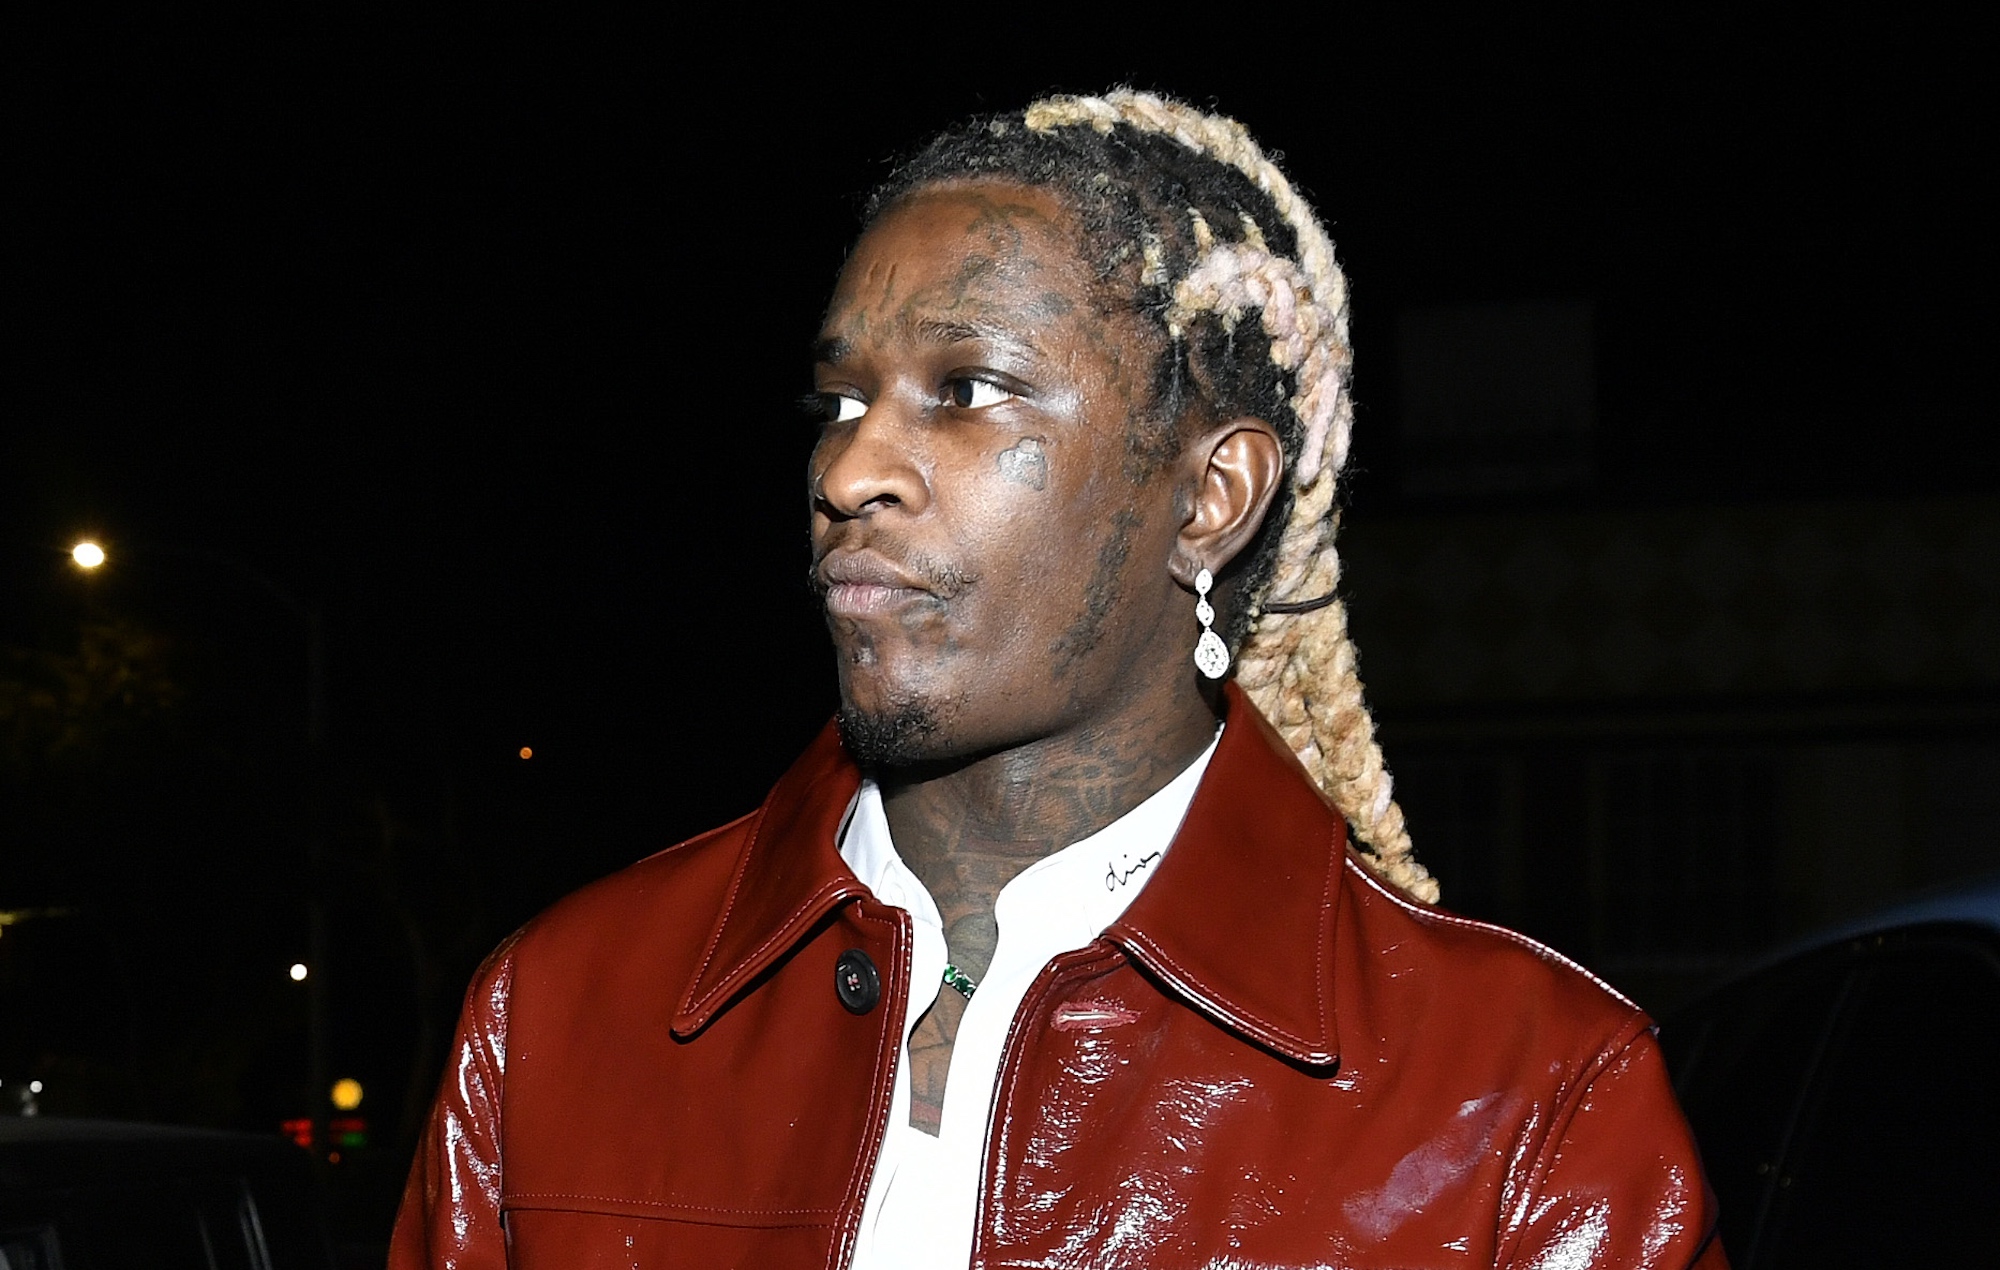 Rap lyrics can be used in Young Thug case, says judge